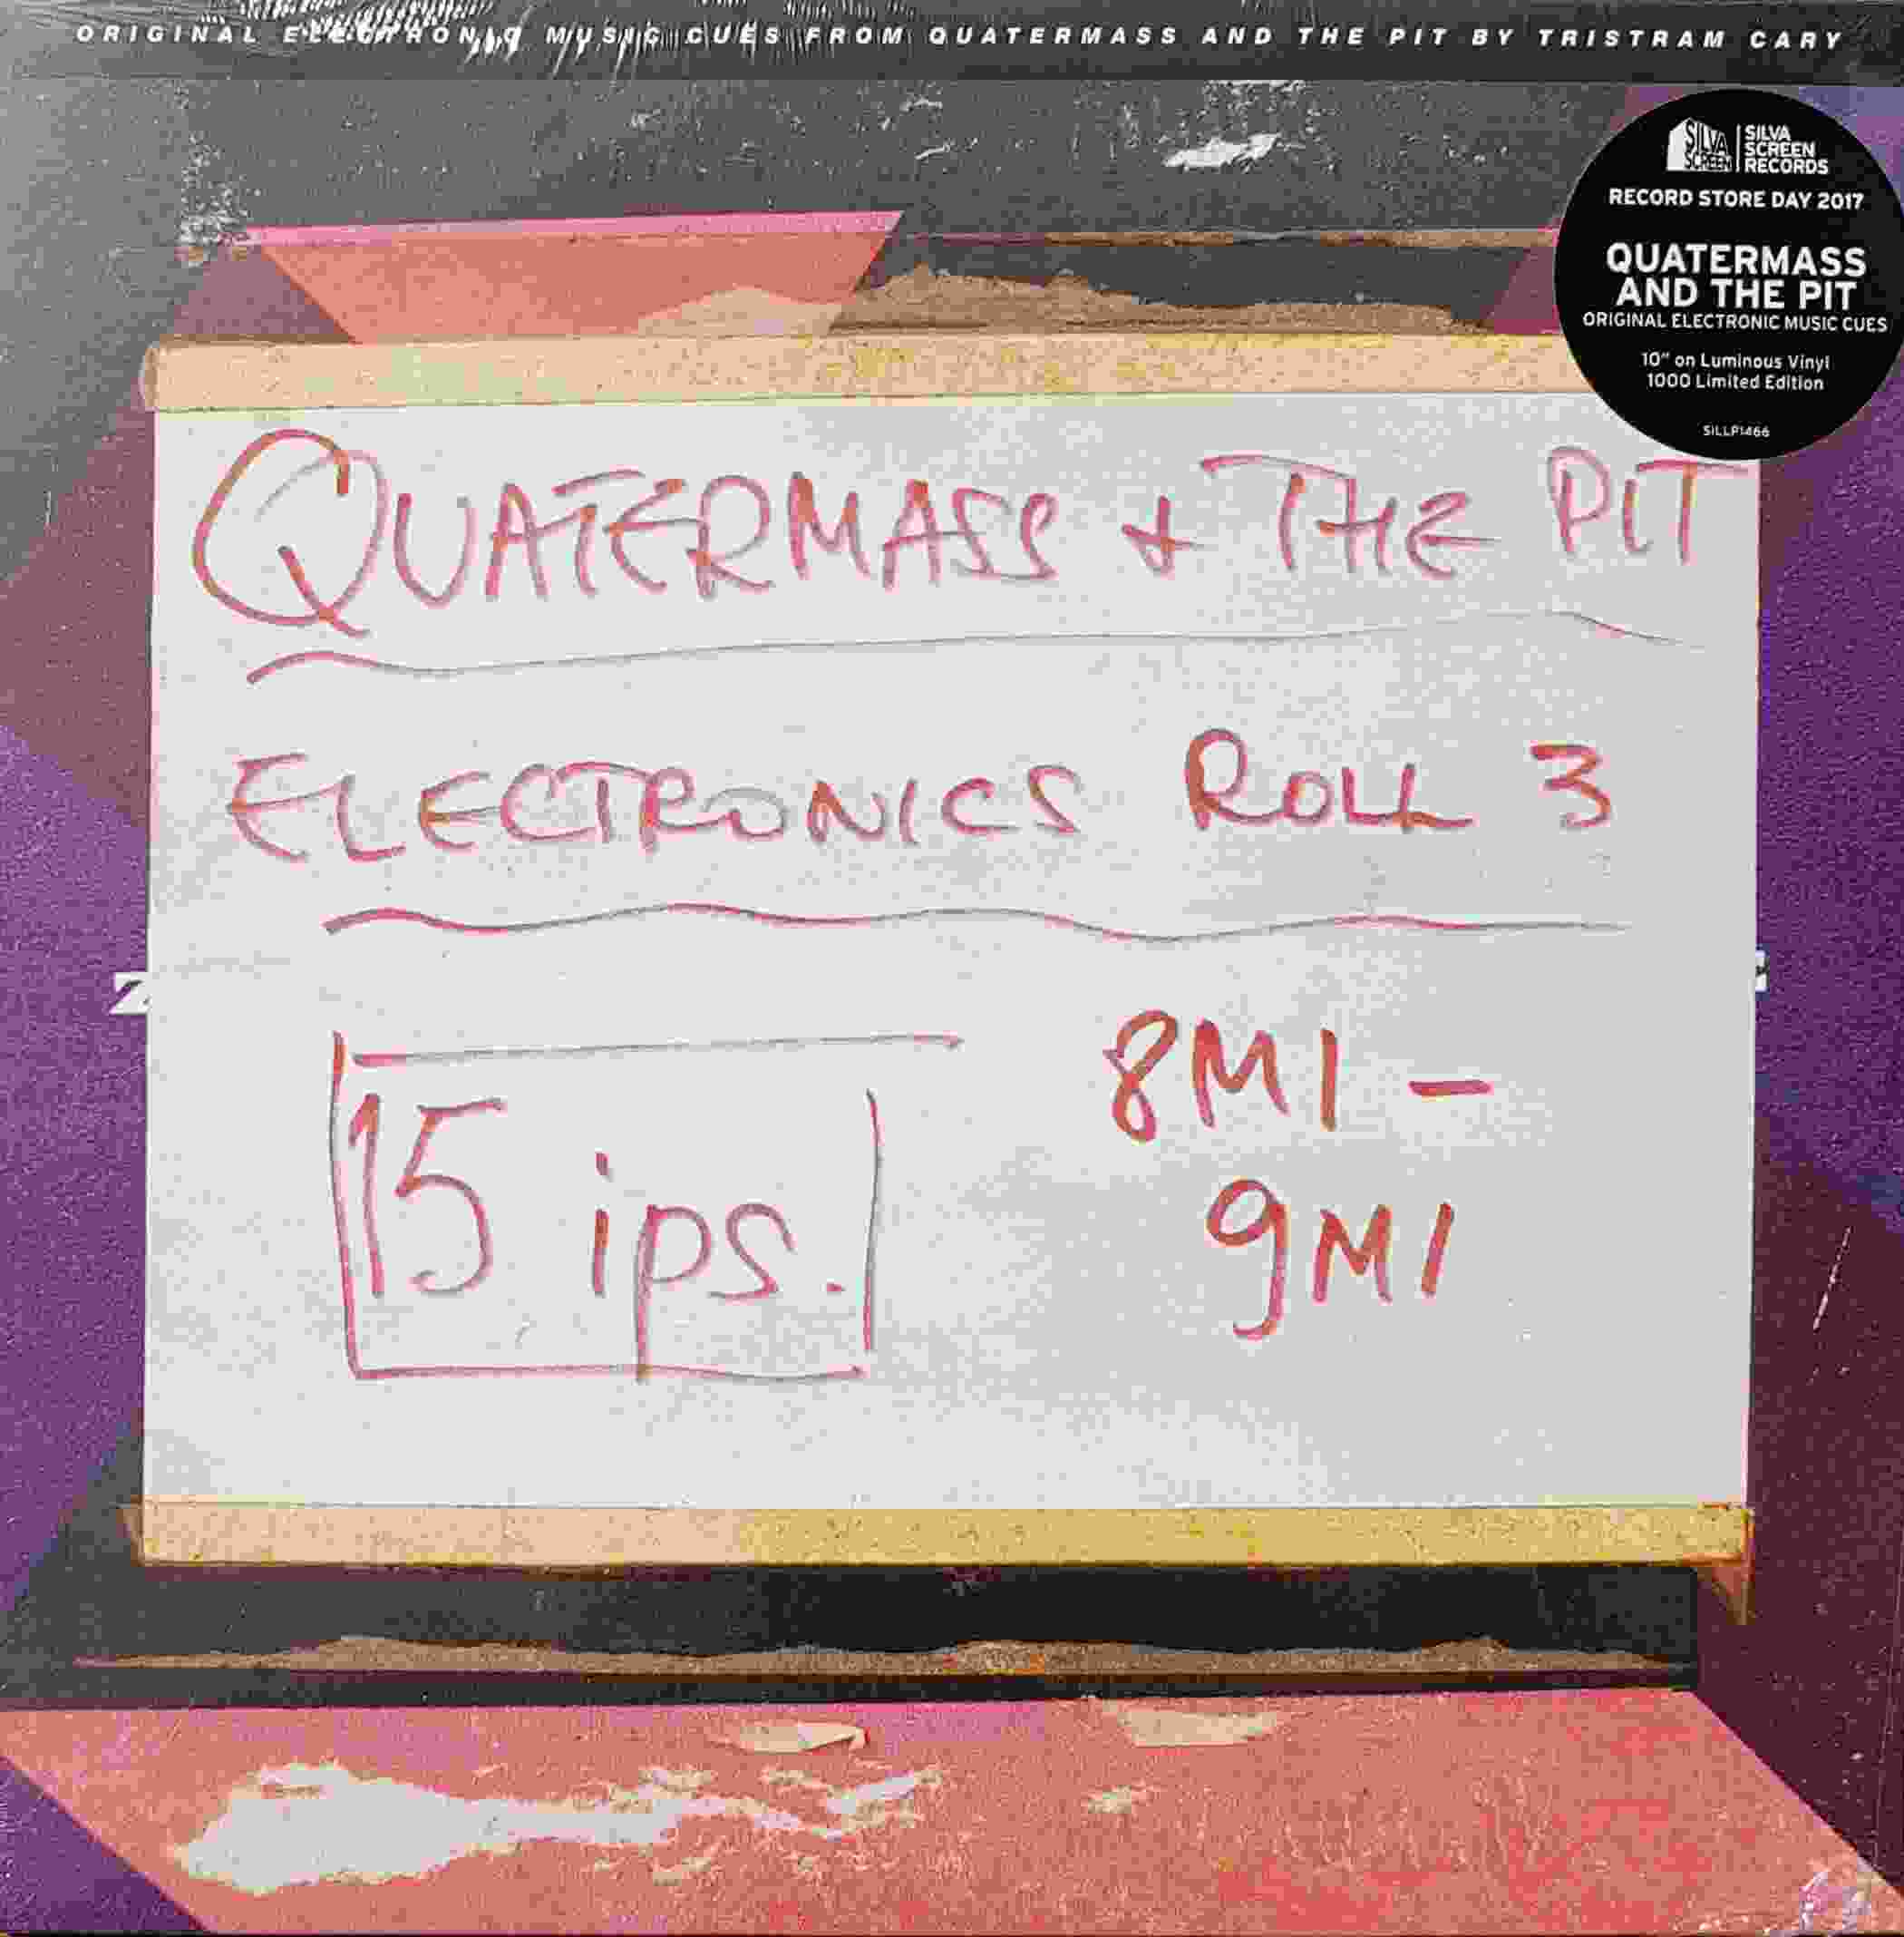 Picture of Quatermass and the pit -  Record Store Day 2017 by artist Tristram Cary from the BBC 10inches - Records and Tapes library